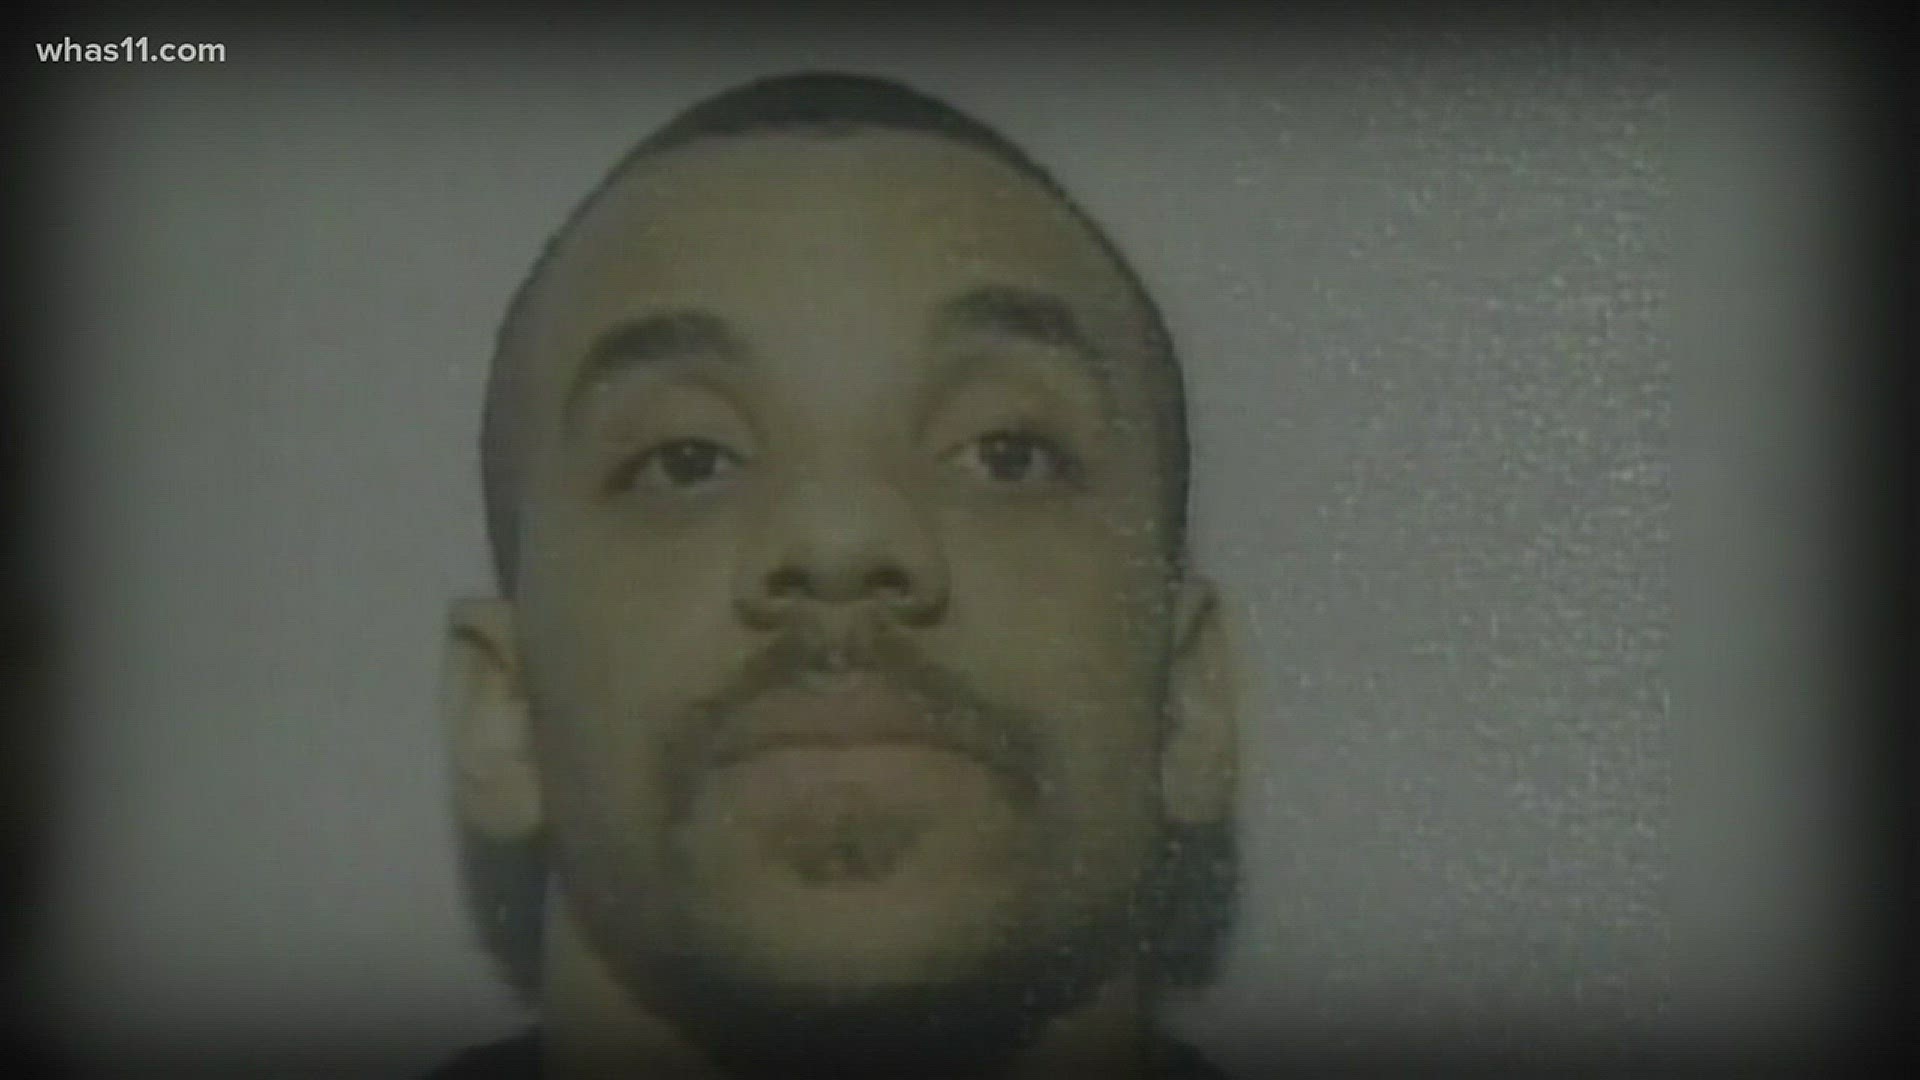 A Louisville man wrongfully convicted of murder has now reached a 7-point-5 million dollar settlement with the city according to his attorneys.